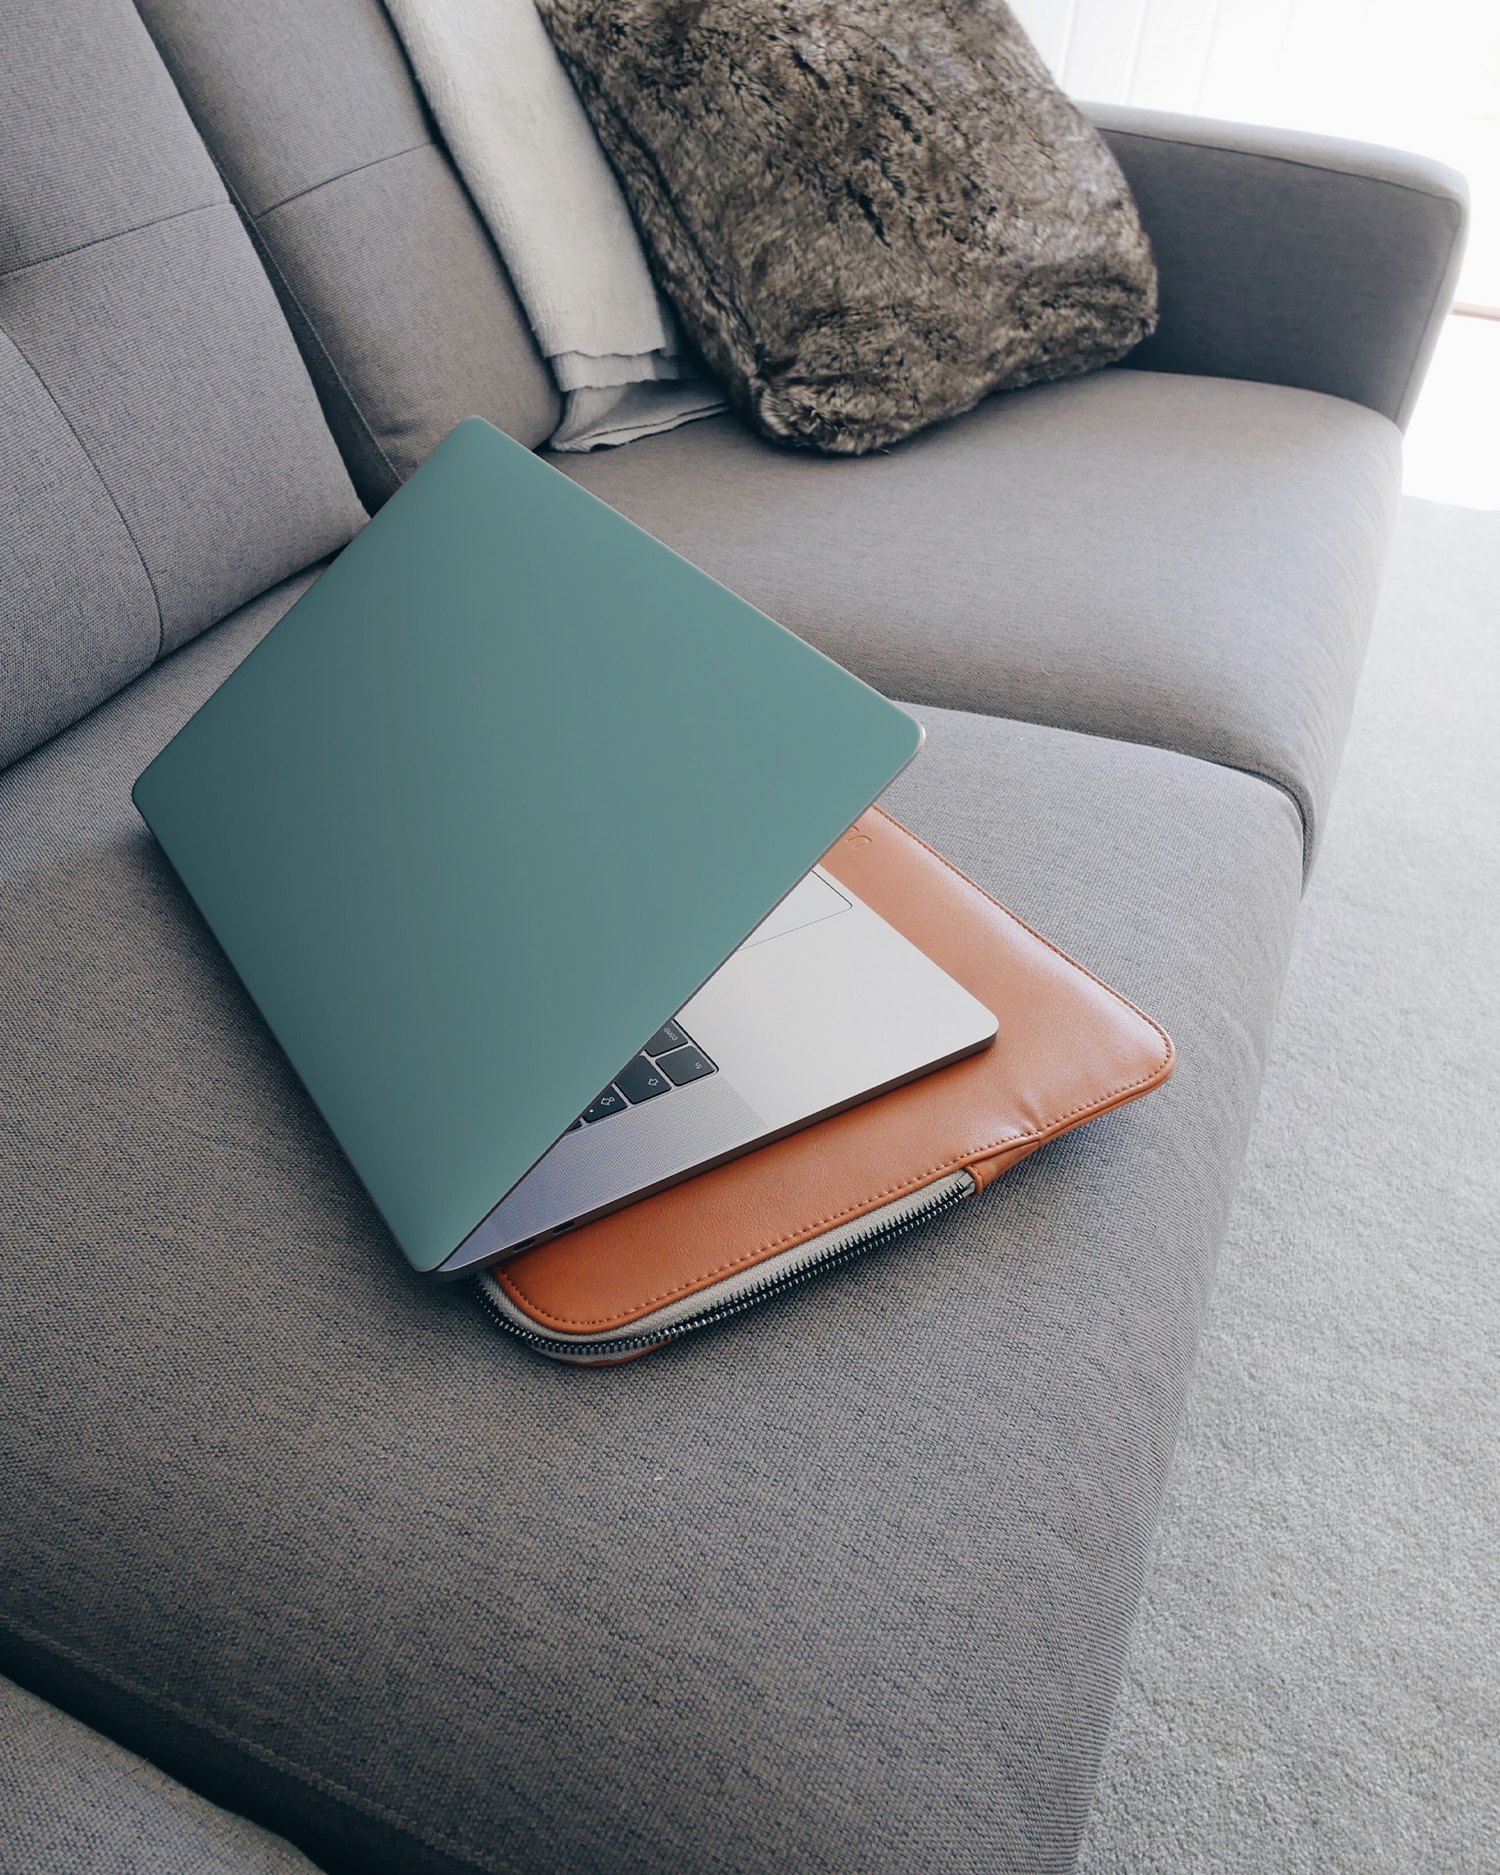 TURQUOISE Laptop Skin for 15 inch Apple MacBooks on a couch